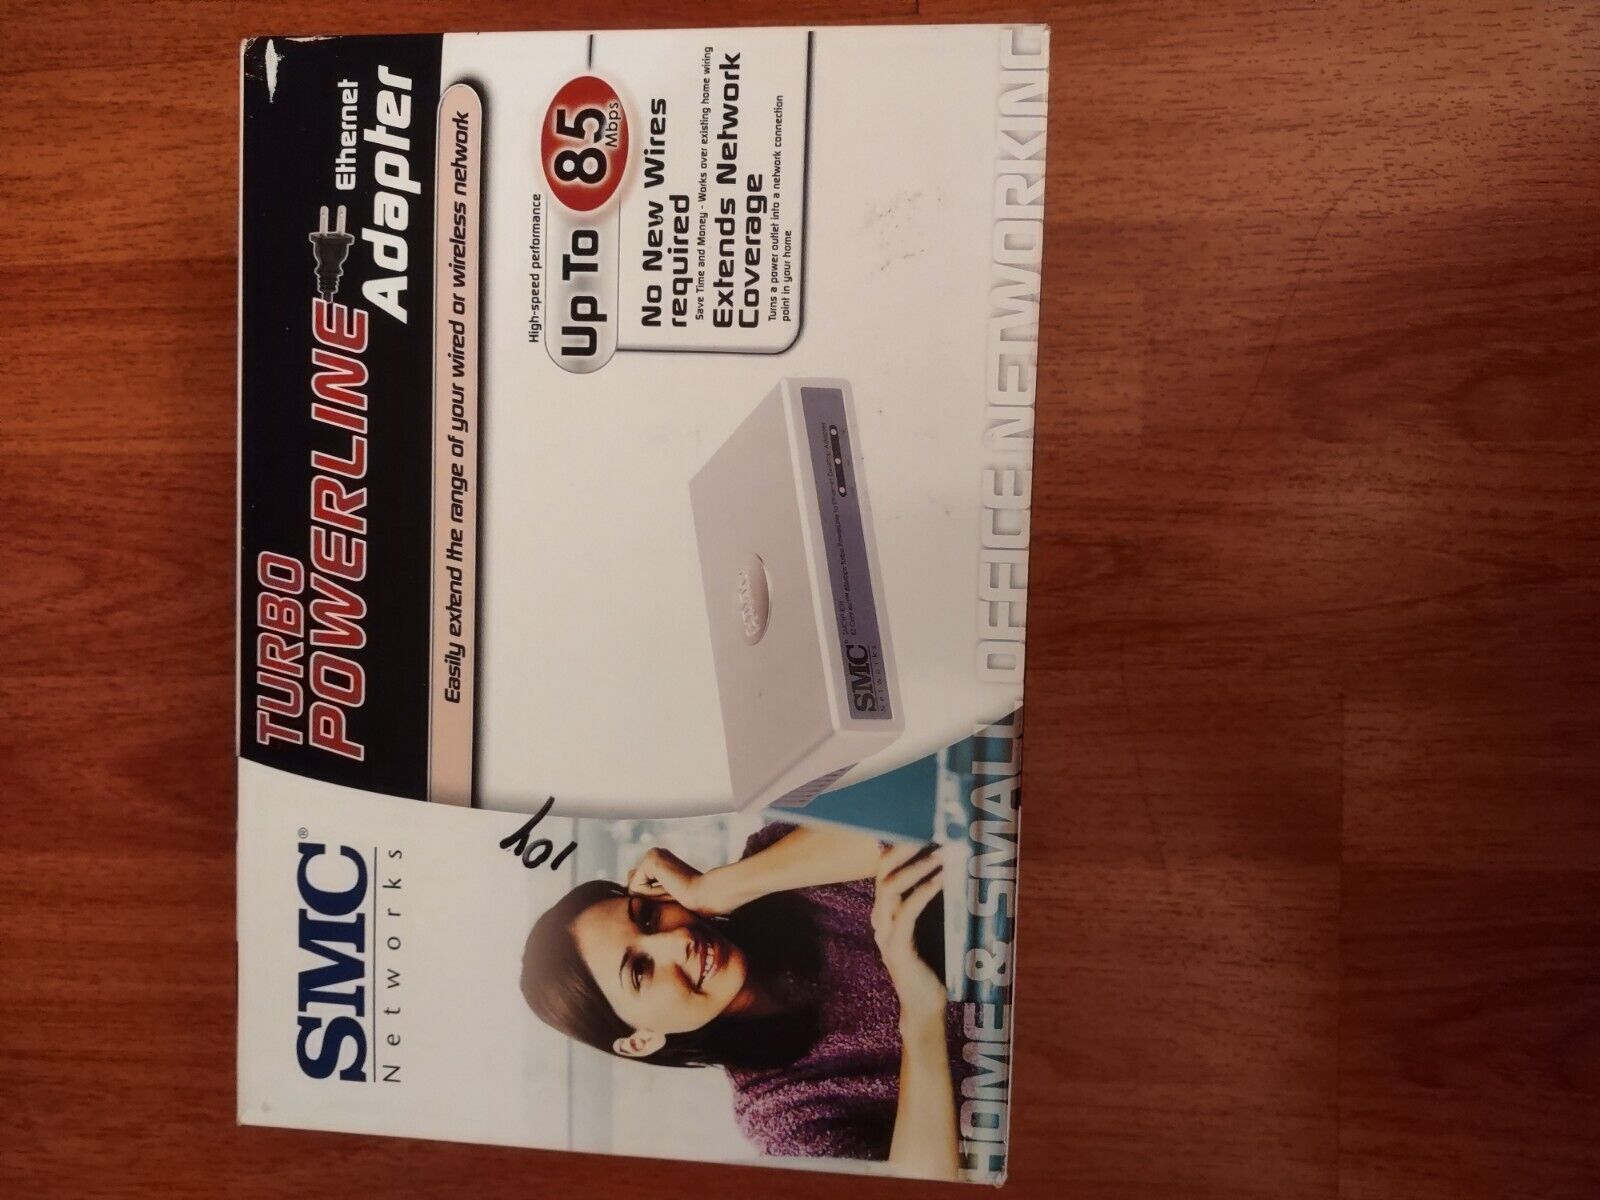 SMC Networks Turbo Power lines Ethernet Adapter